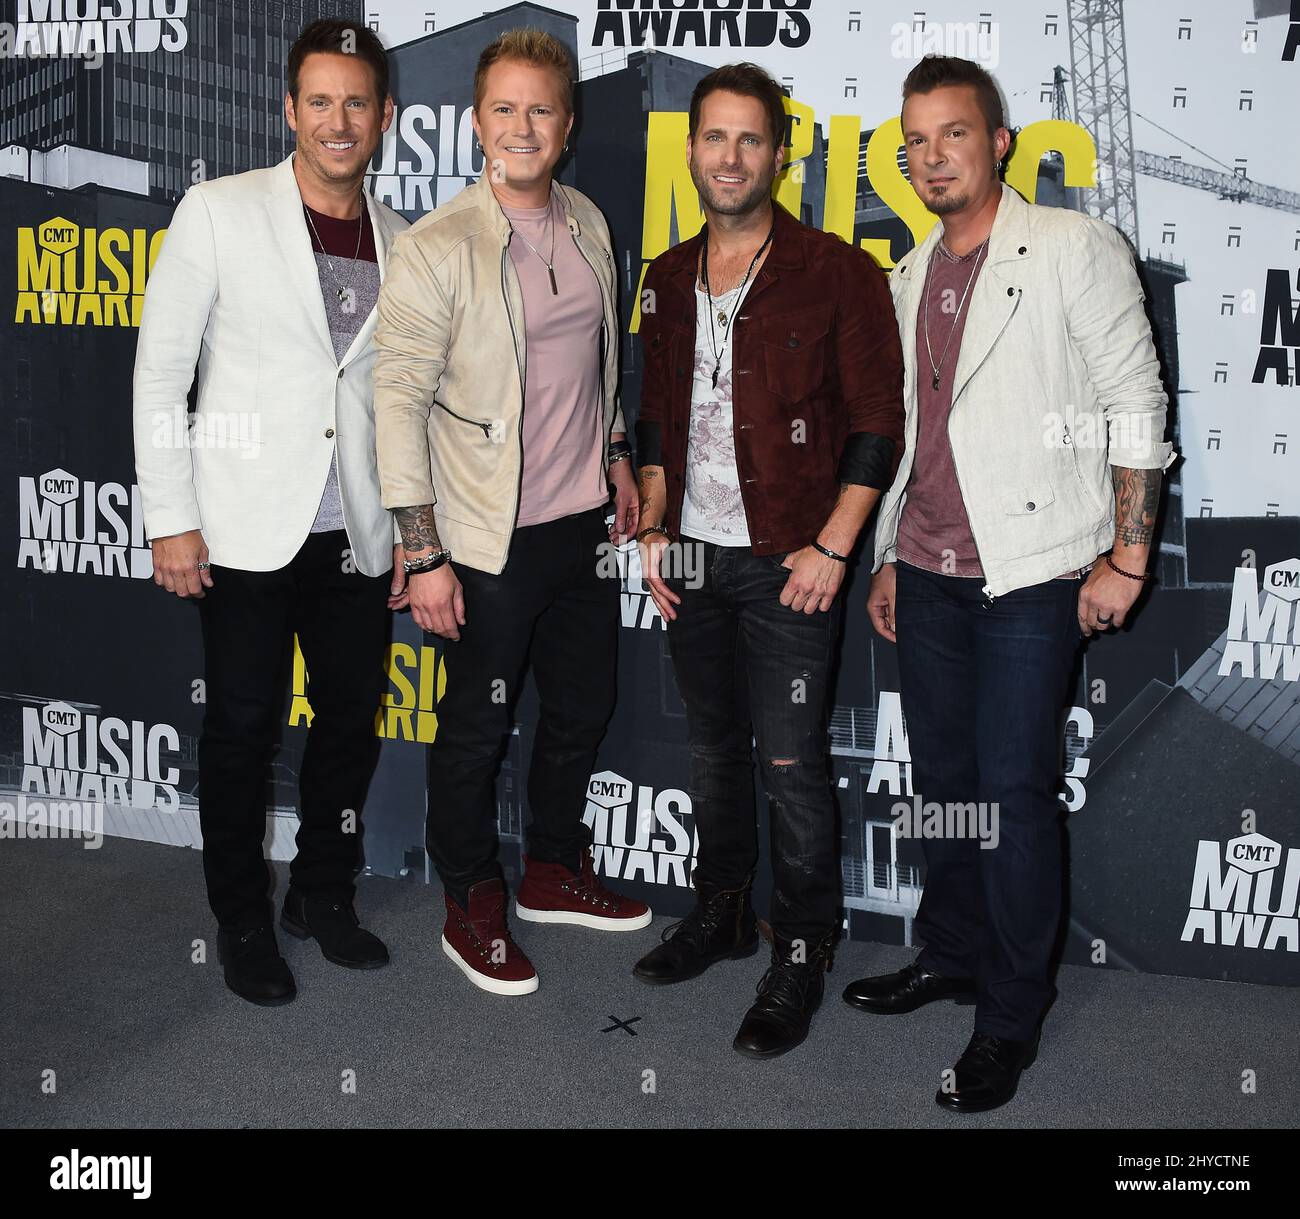 Parmalee attending the CMT Music Awards 2017 held at the Music City Center Stock Photo